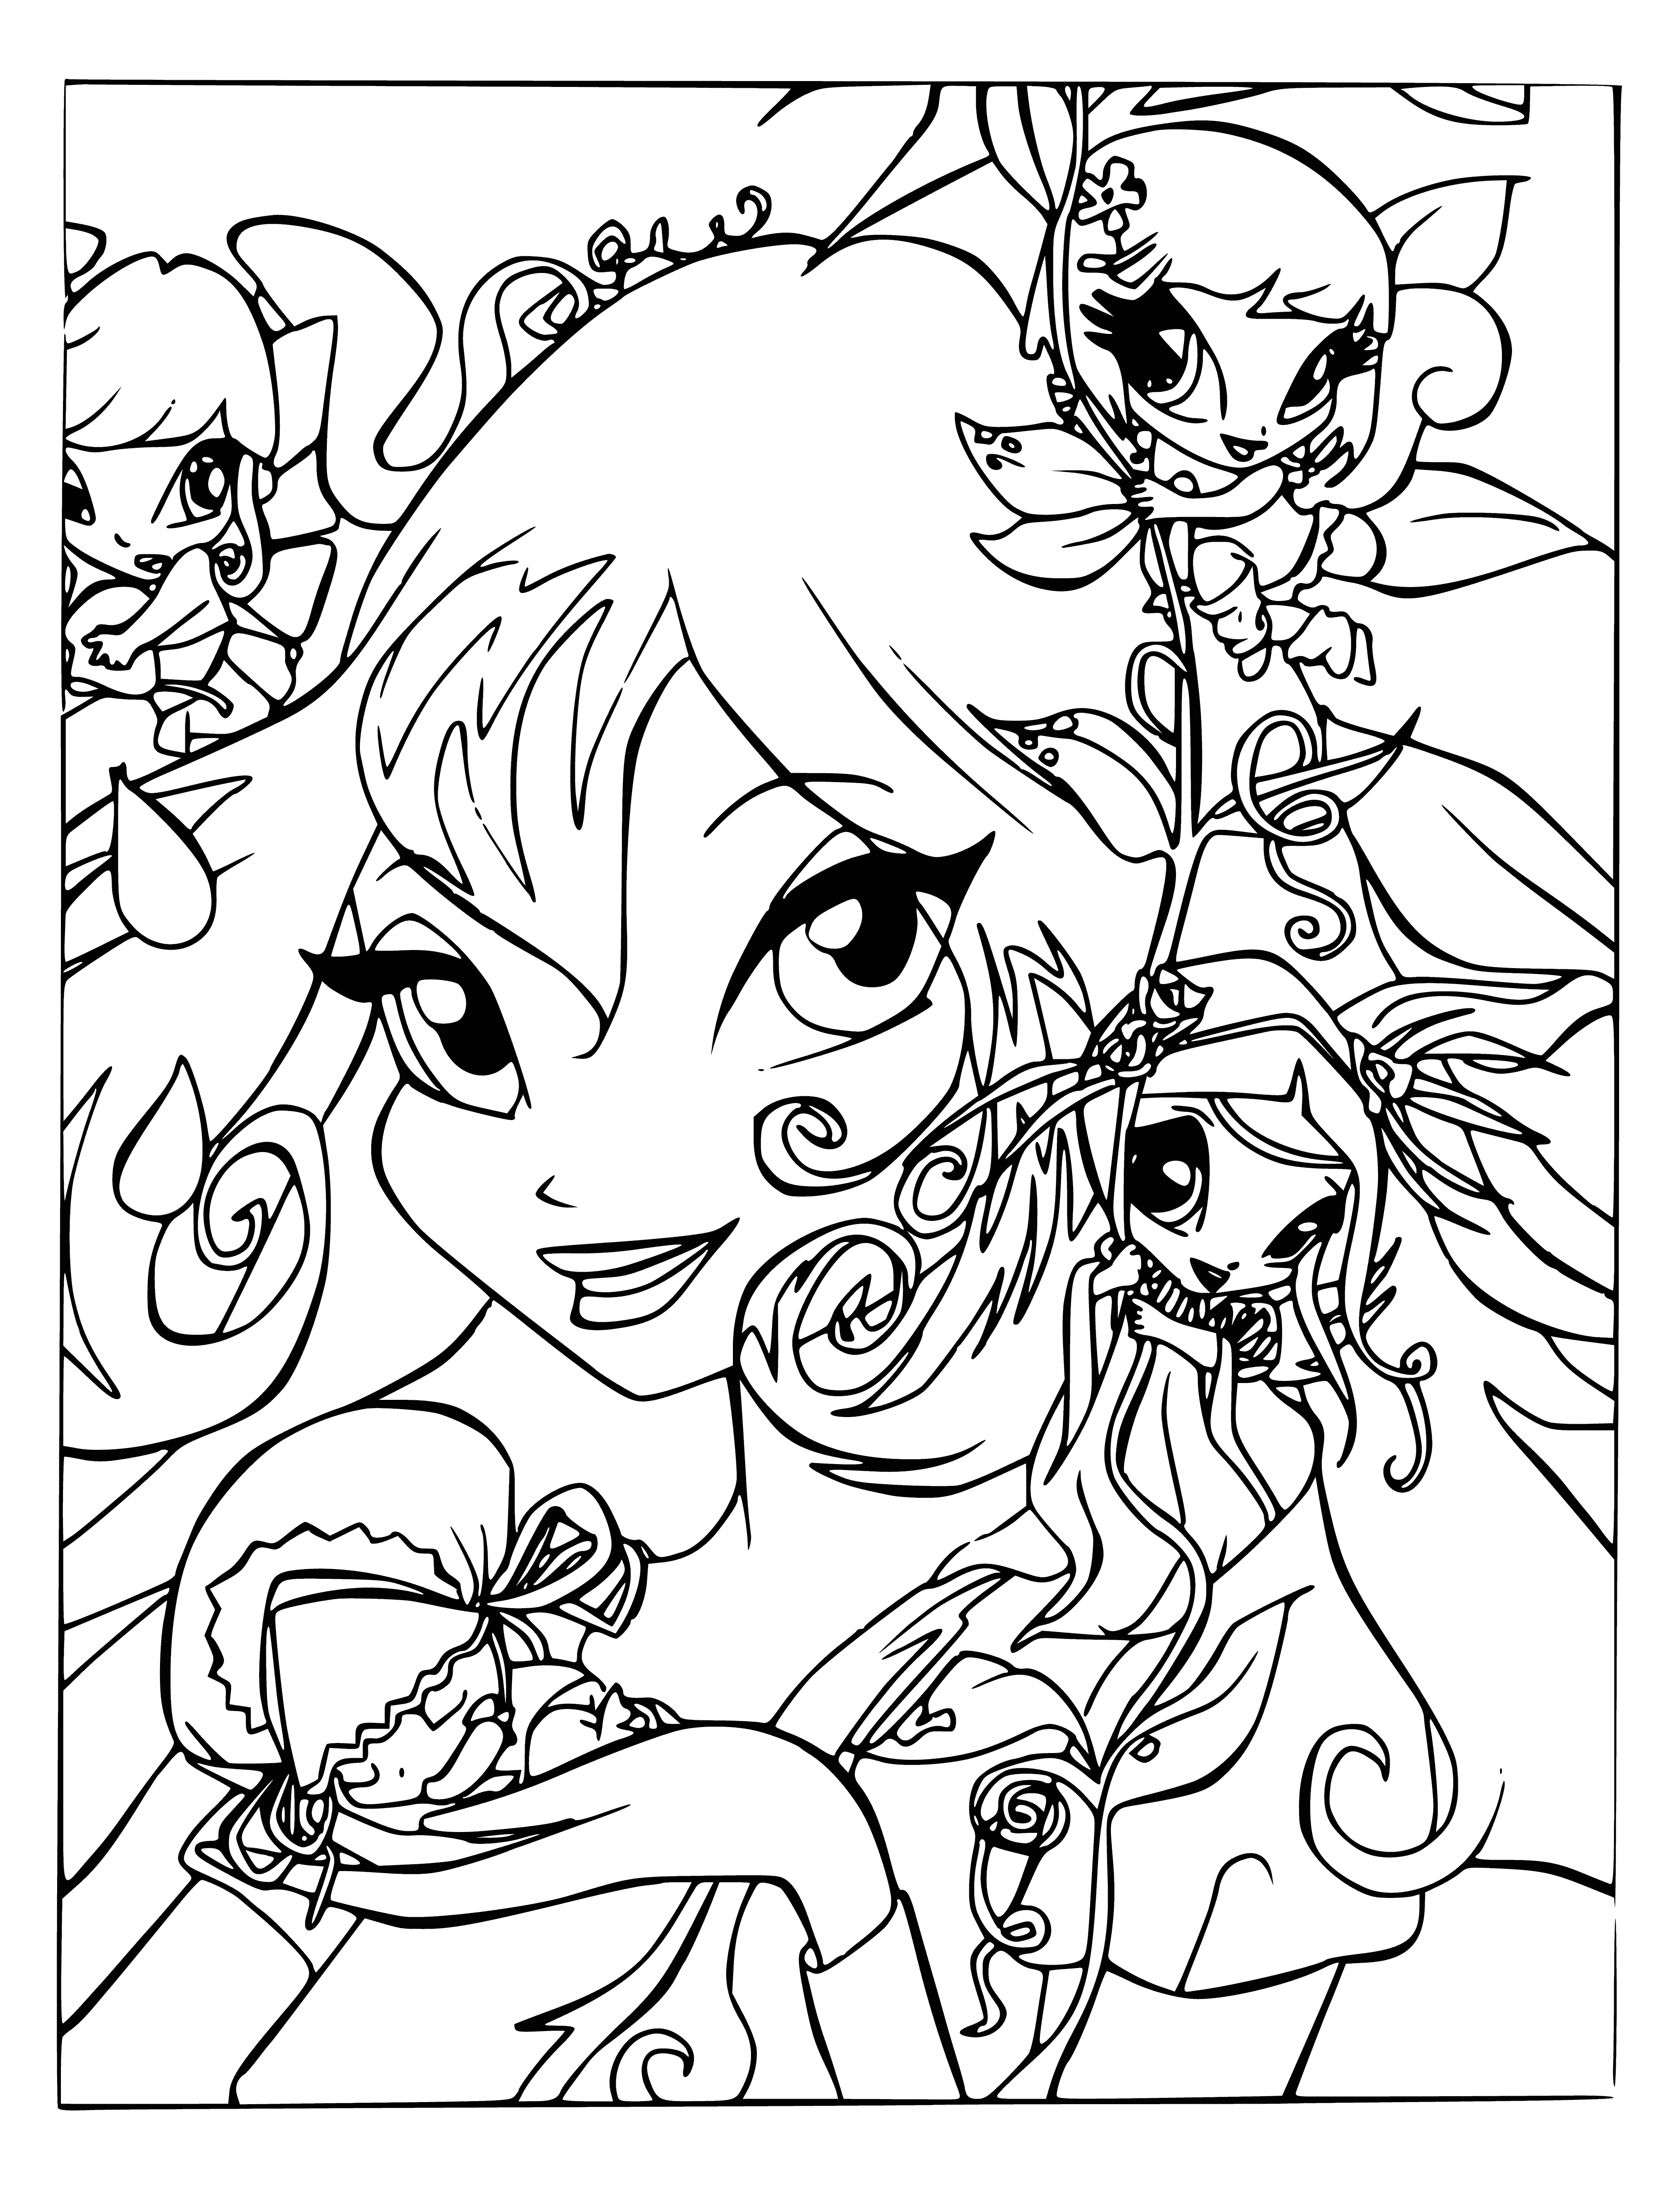 coloring page: Girl with flower crown & wand surrounded by butterflies.